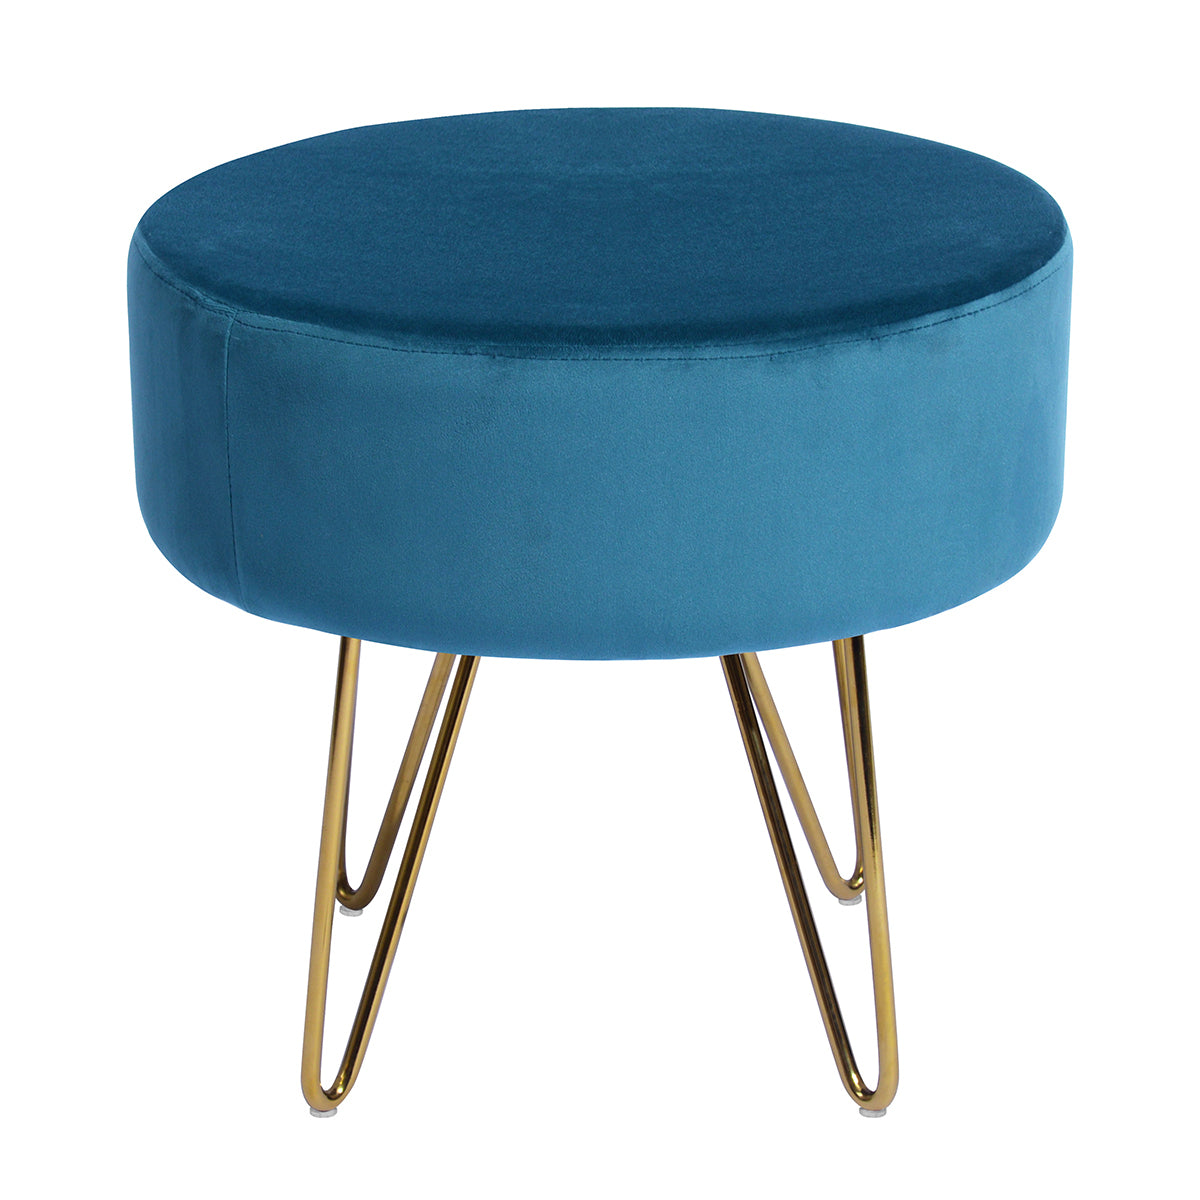 17.7" Round Shaped Ottoman with Metal Legs (Teal)